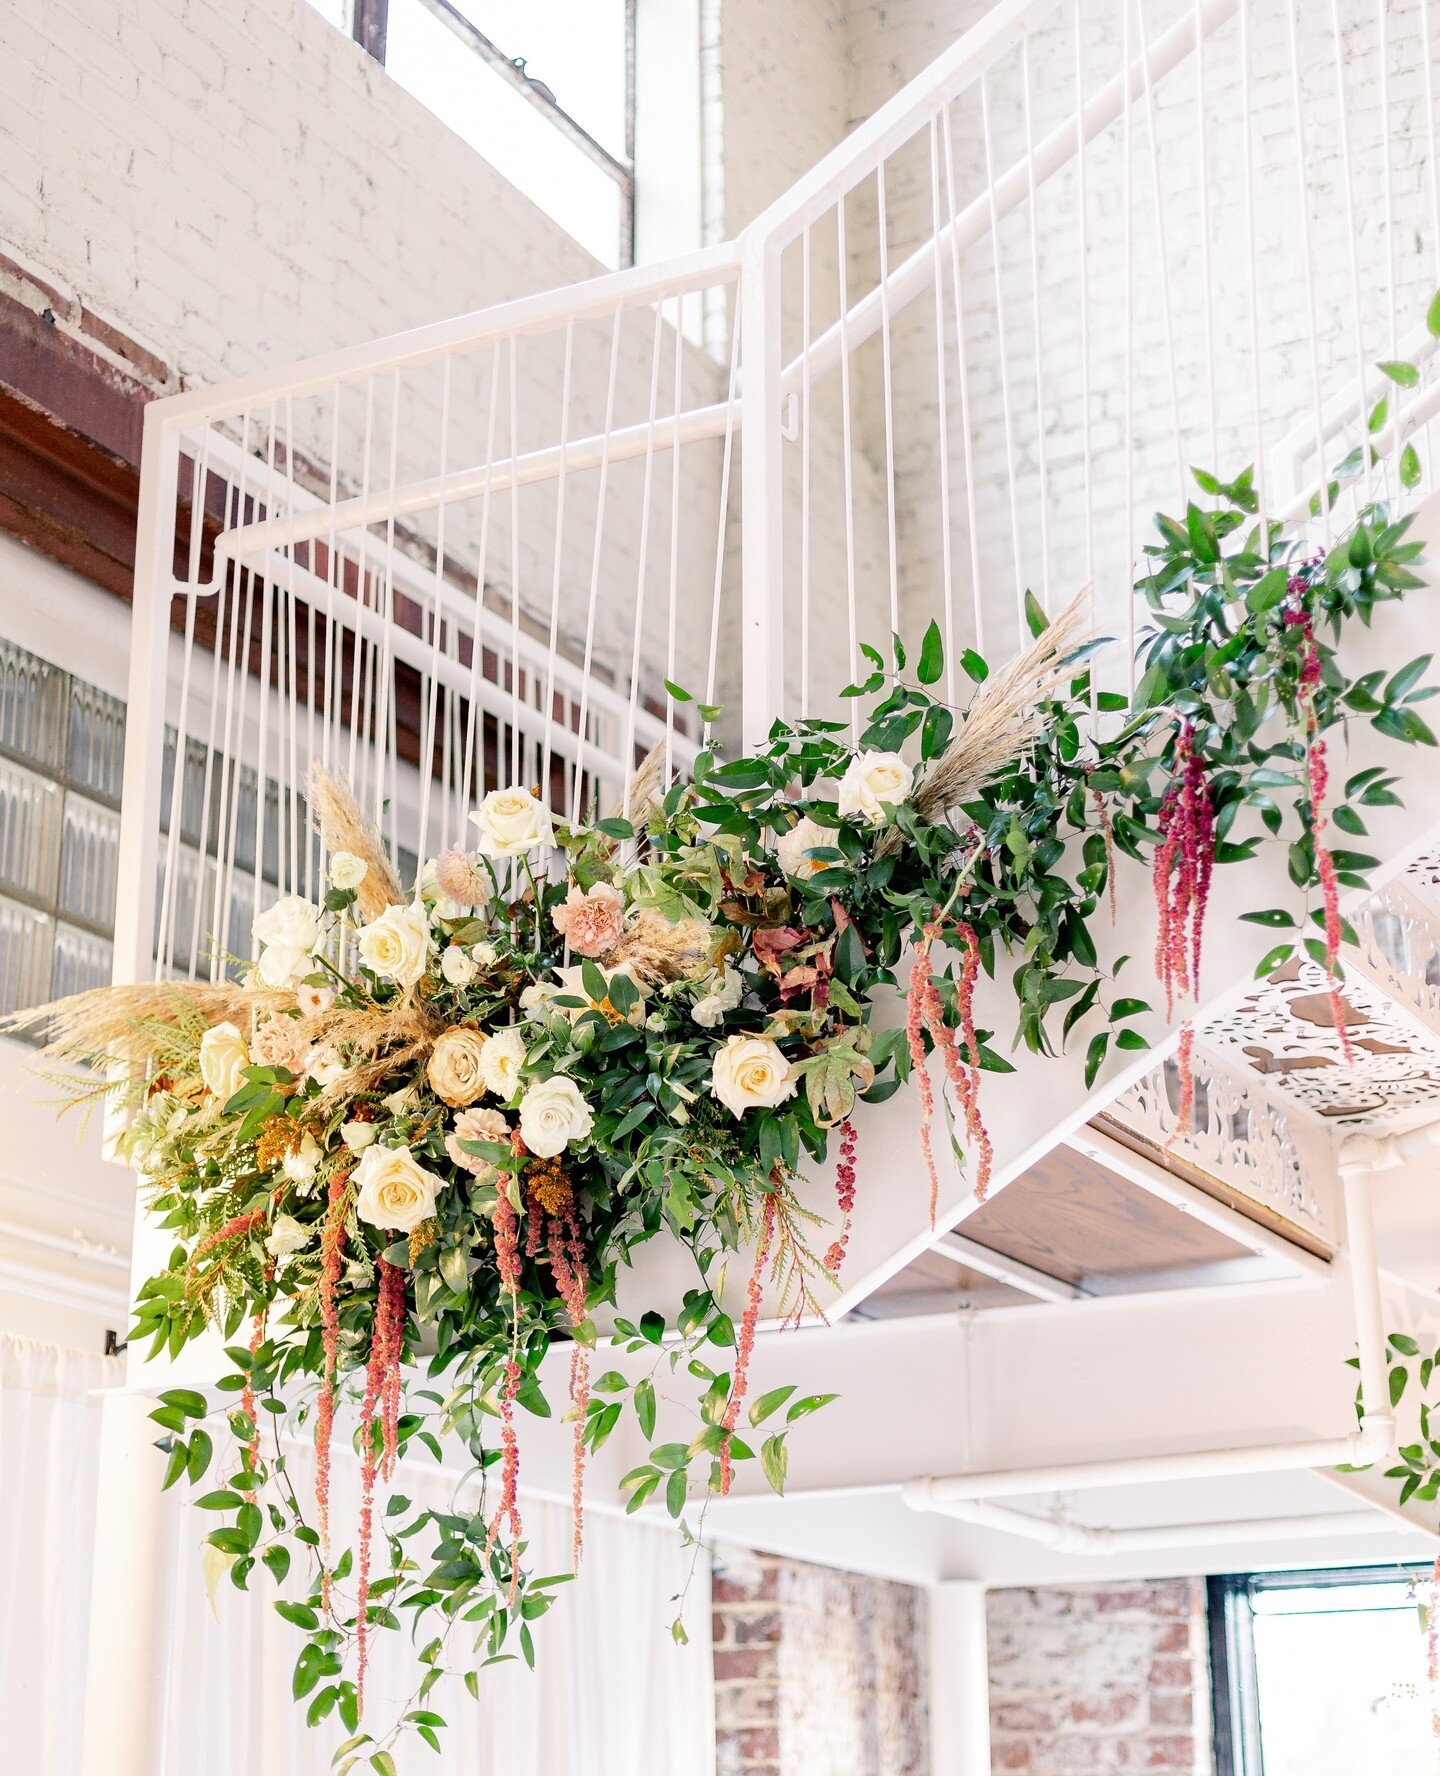 Can a reception get more dreamy than this?? We are still amazing at how gorgeous this staircase turned out. It was a perfect day celebrating McKenzie &amp; Connor!!⁠
⁠
📷: @ericandjamiephoto @katrinalangland⁠⁠
🏡: @bridgestreet_venue⁠
☀️: @prophouseb